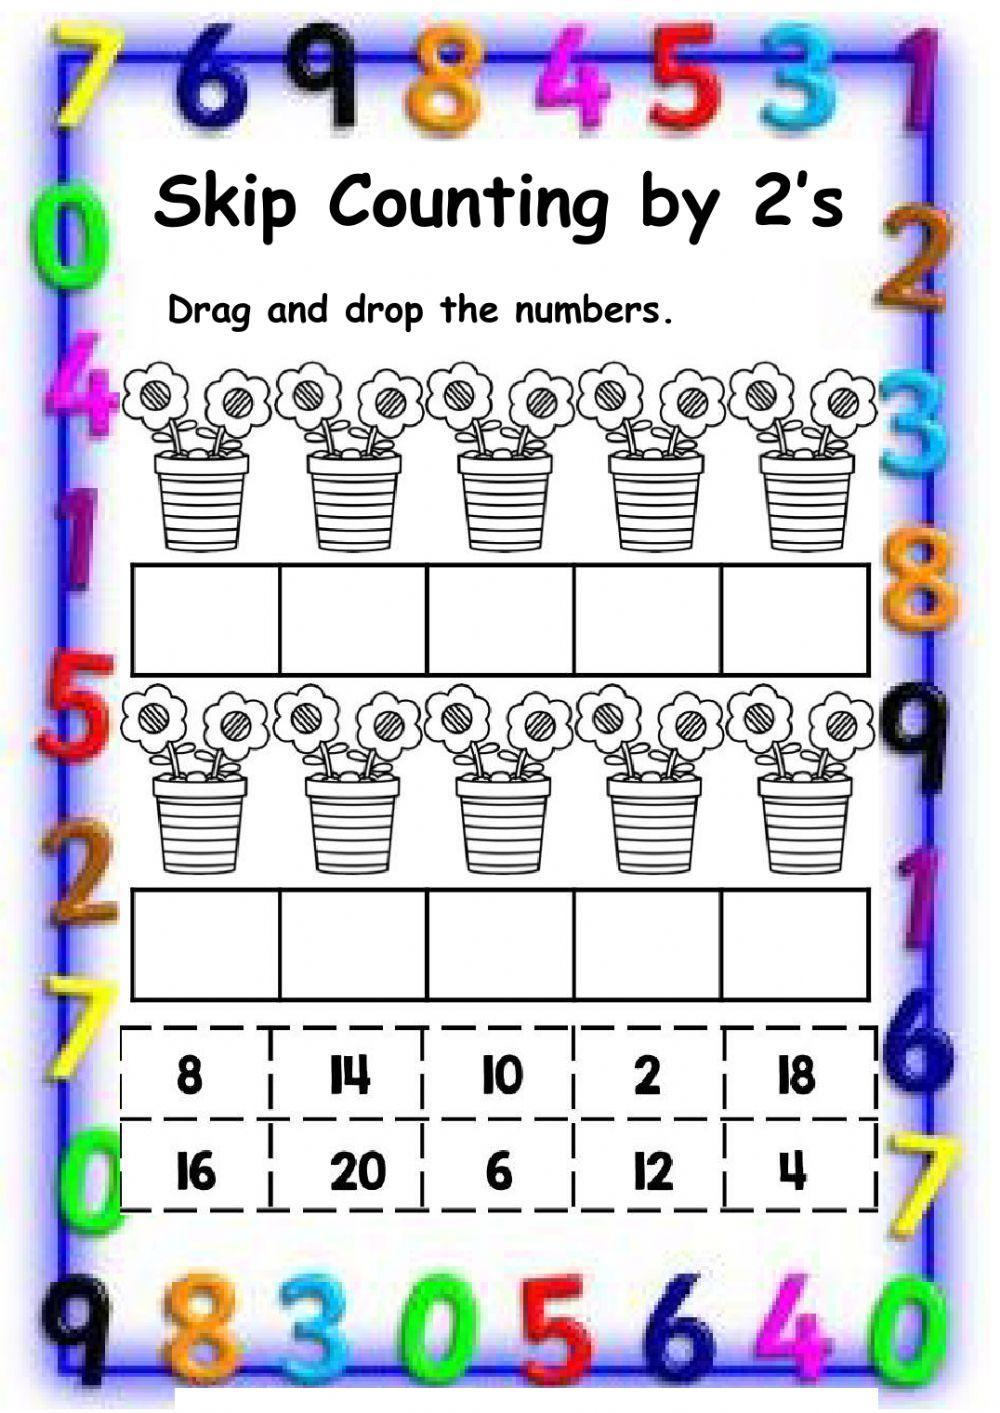 Skip counting by 2